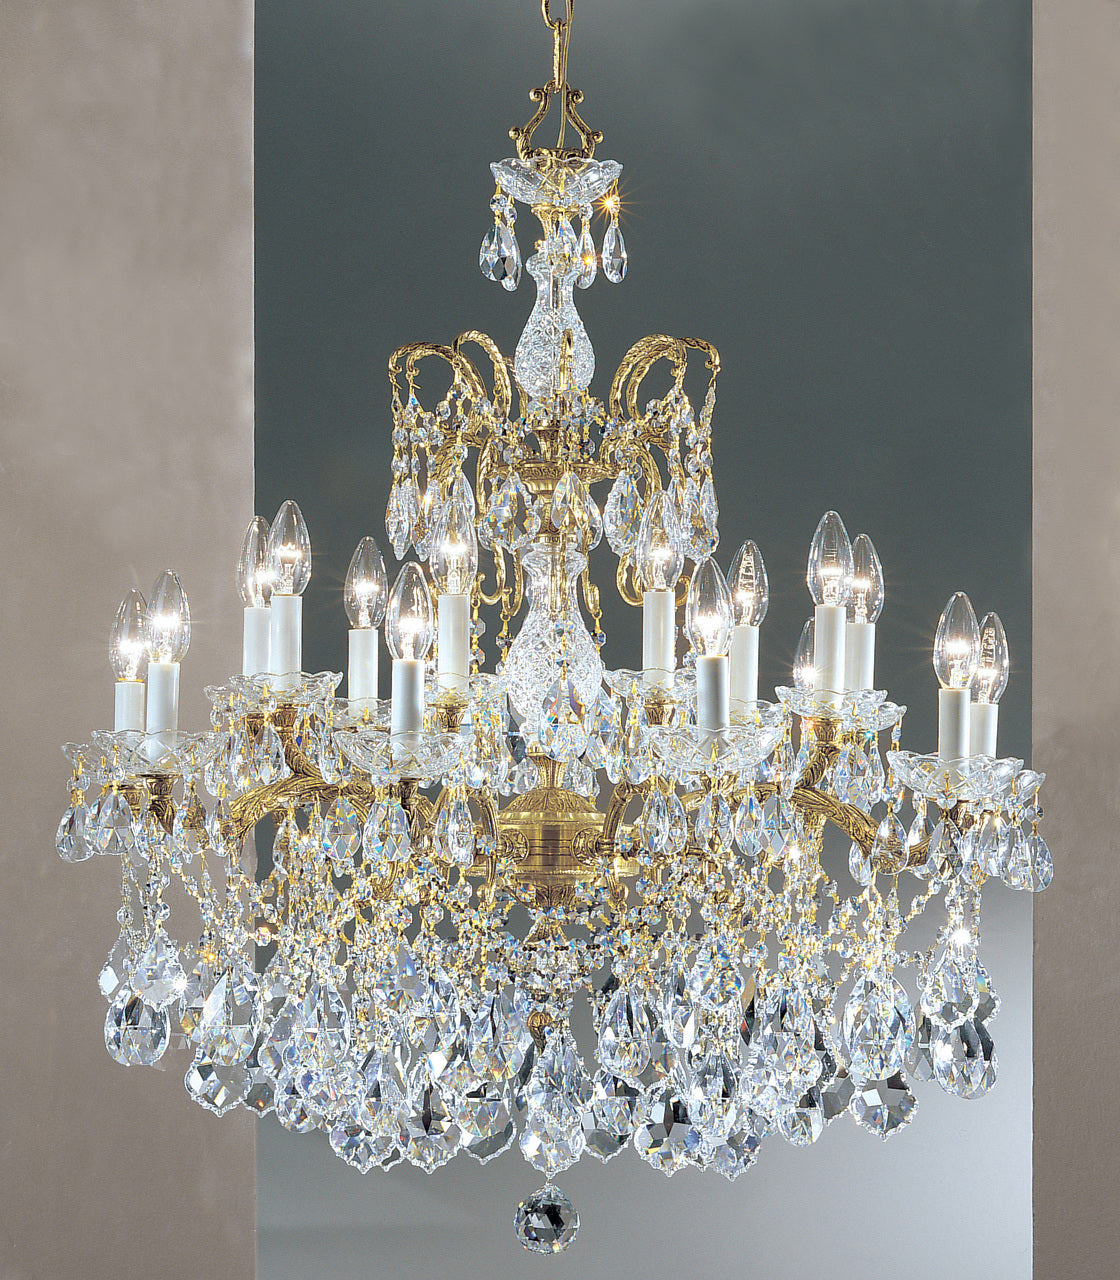 Classic Lighting 5548 OWB C Madrid Imperial Crystal/Cast Brass Chandelier in Olde World Bronze (Imported from Spain)